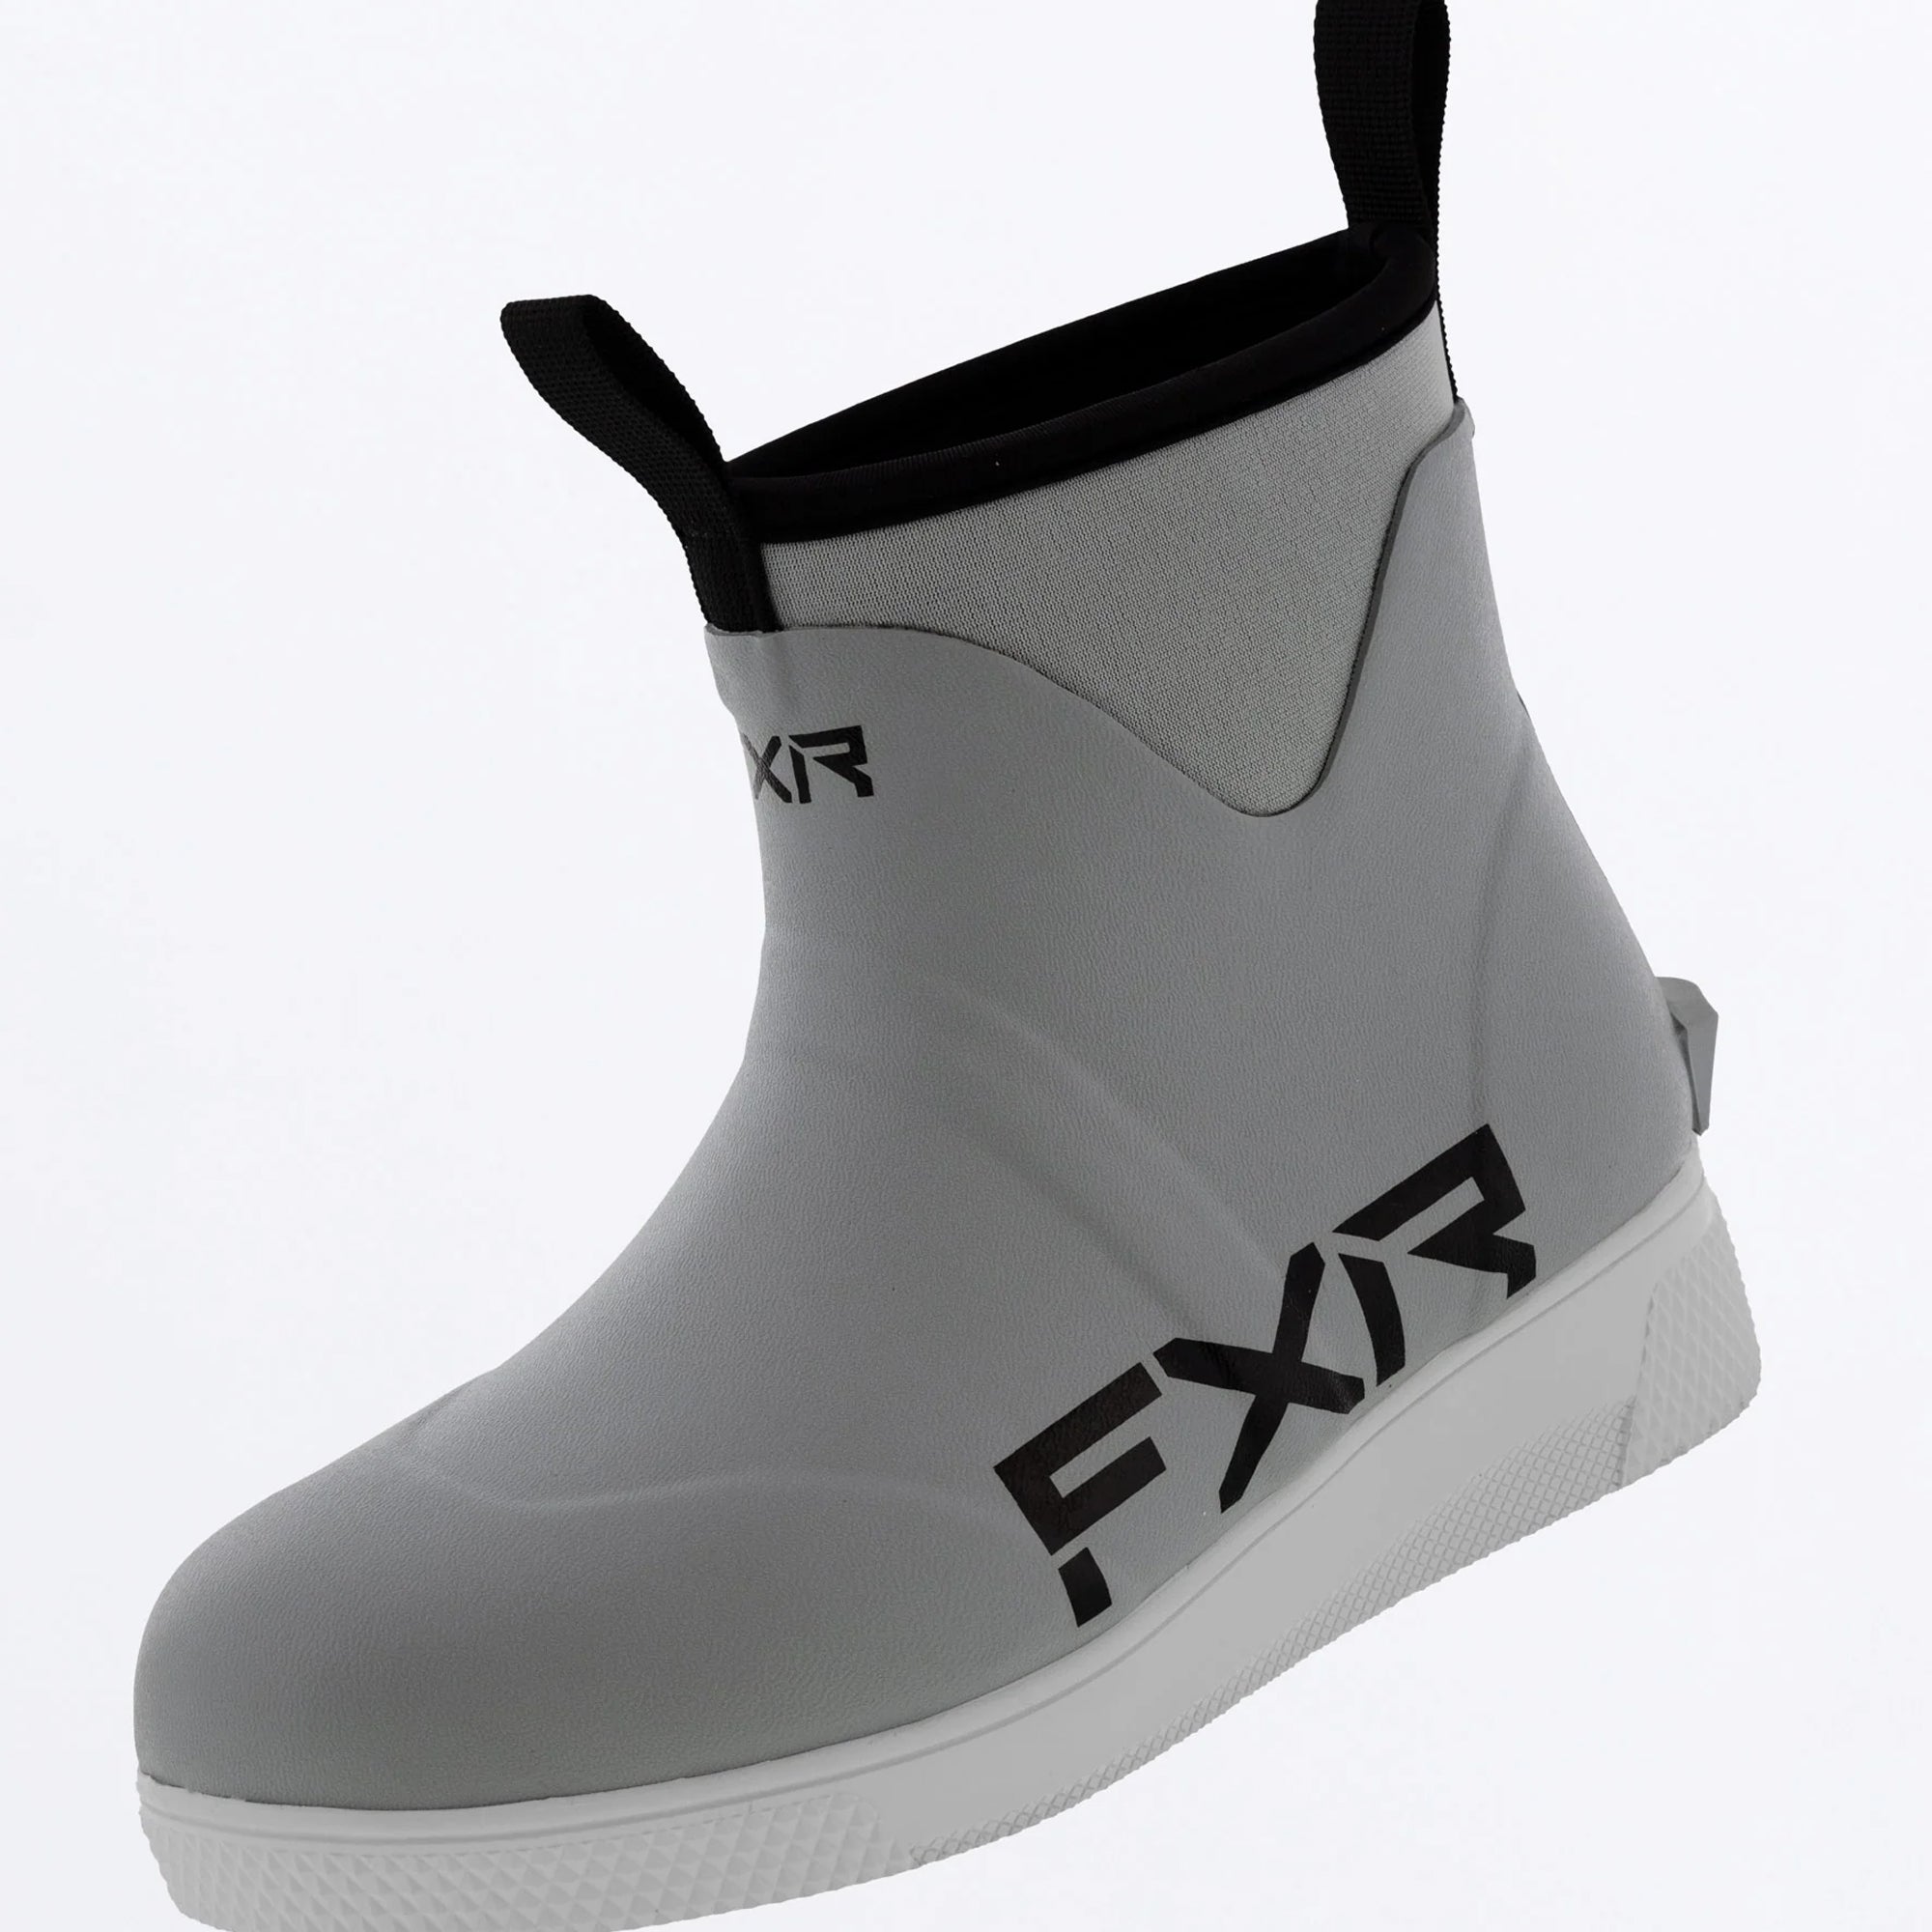 FXR Mens Tournament Fishing Boots Pull-On Ankle Height Waterproof